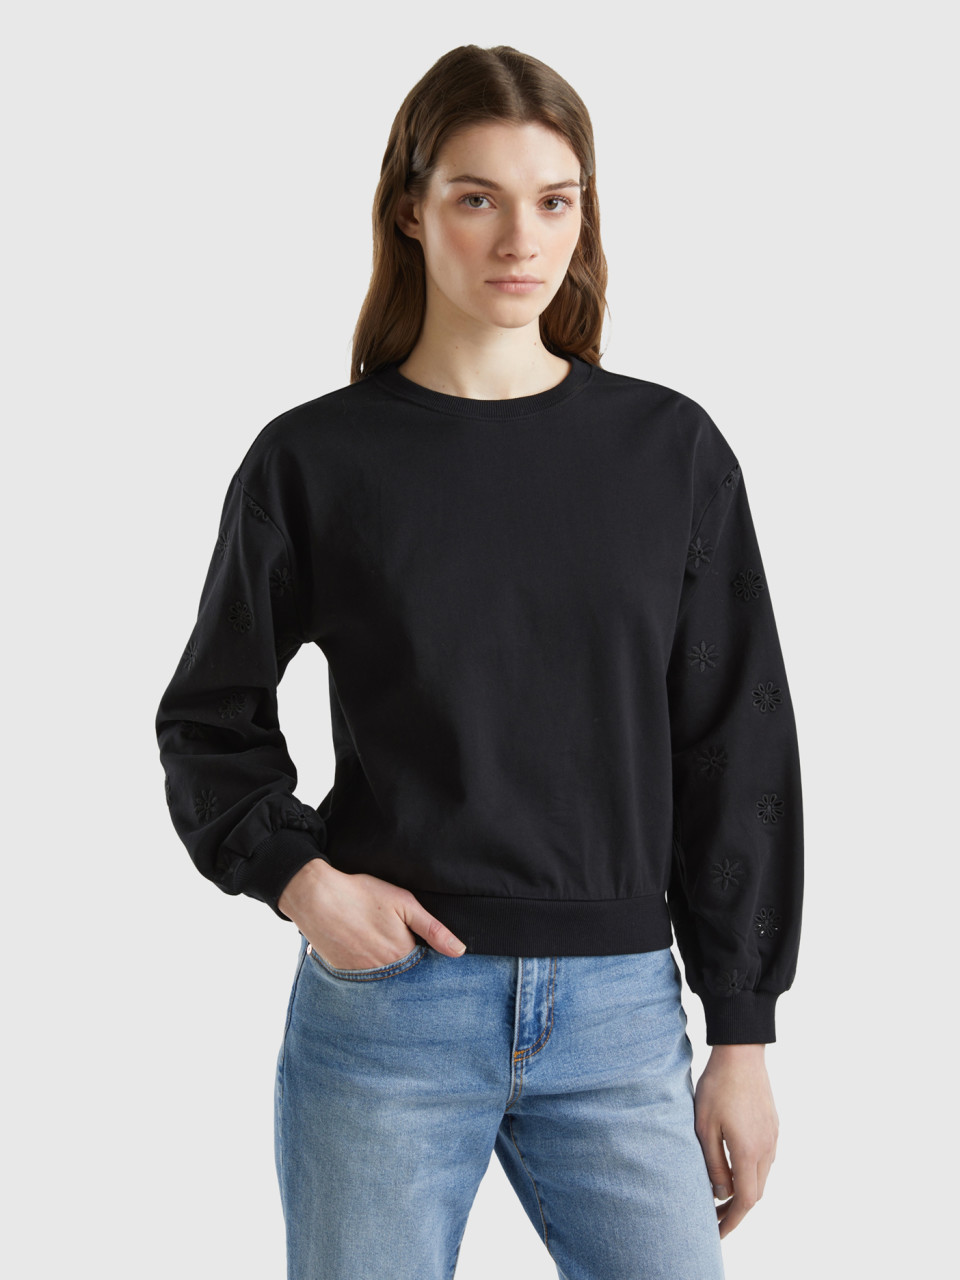 Benetton, Sweatshirt With Floral Embroidery, Black, Women